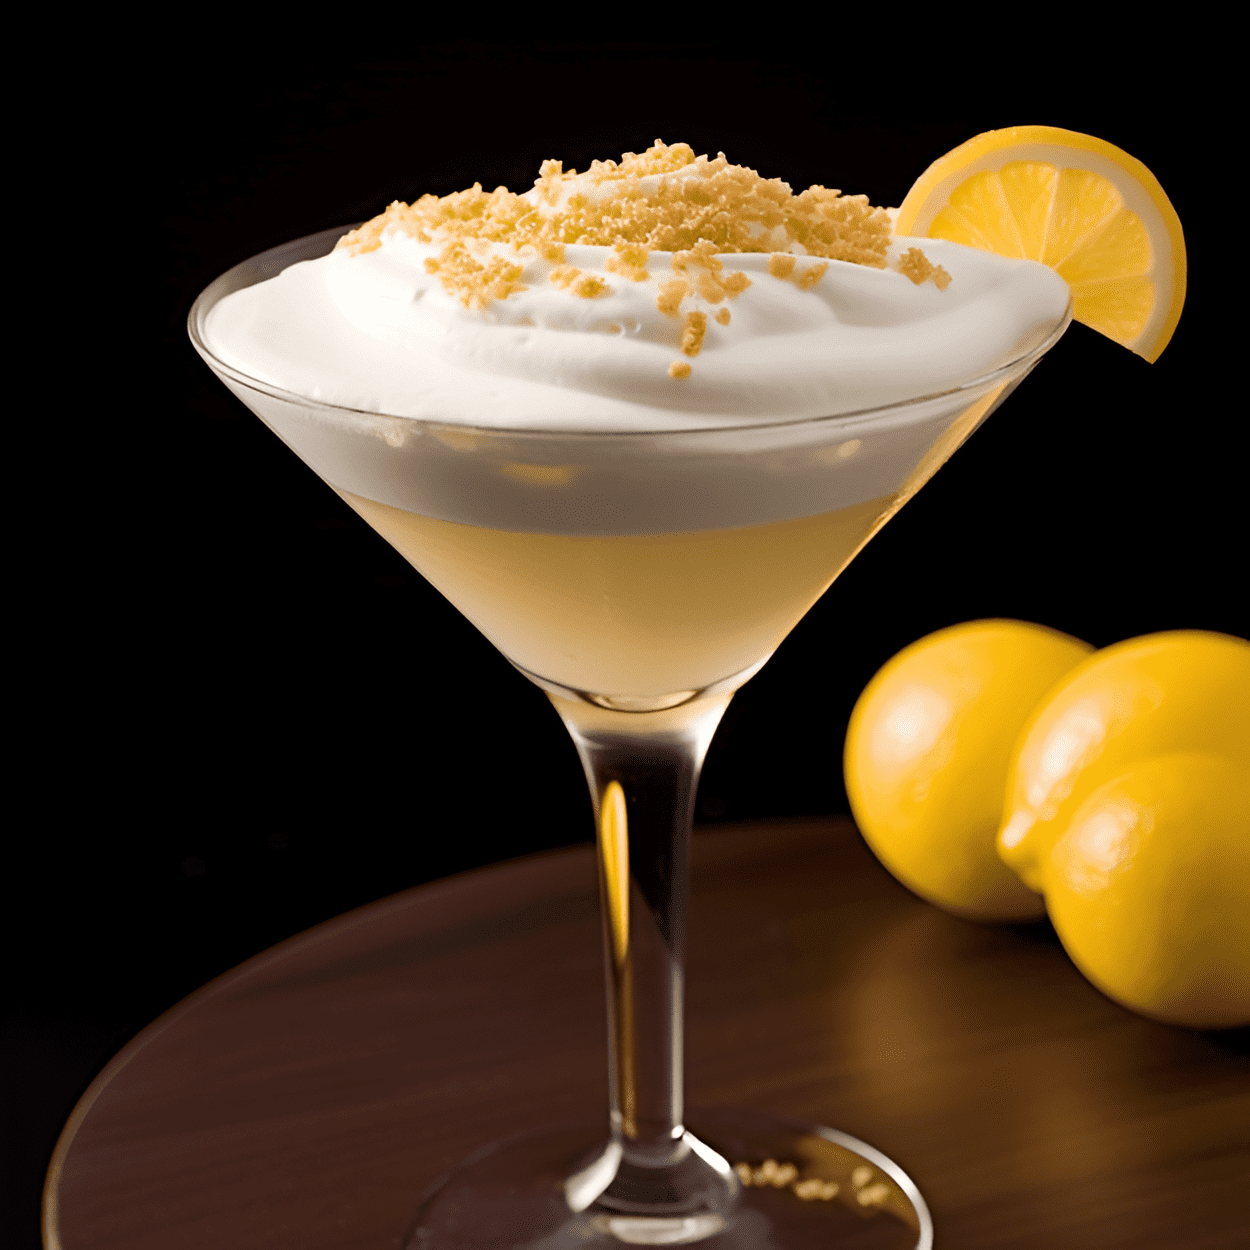 Cheesecake Cocktail Recipe - The Cheesecake Cocktail is rich, creamy, and sweet. It has a strong vanilla flavor with a hint of tanginess from the lemon, and the graham cracker rim adds a delightful crunch and sweetness.